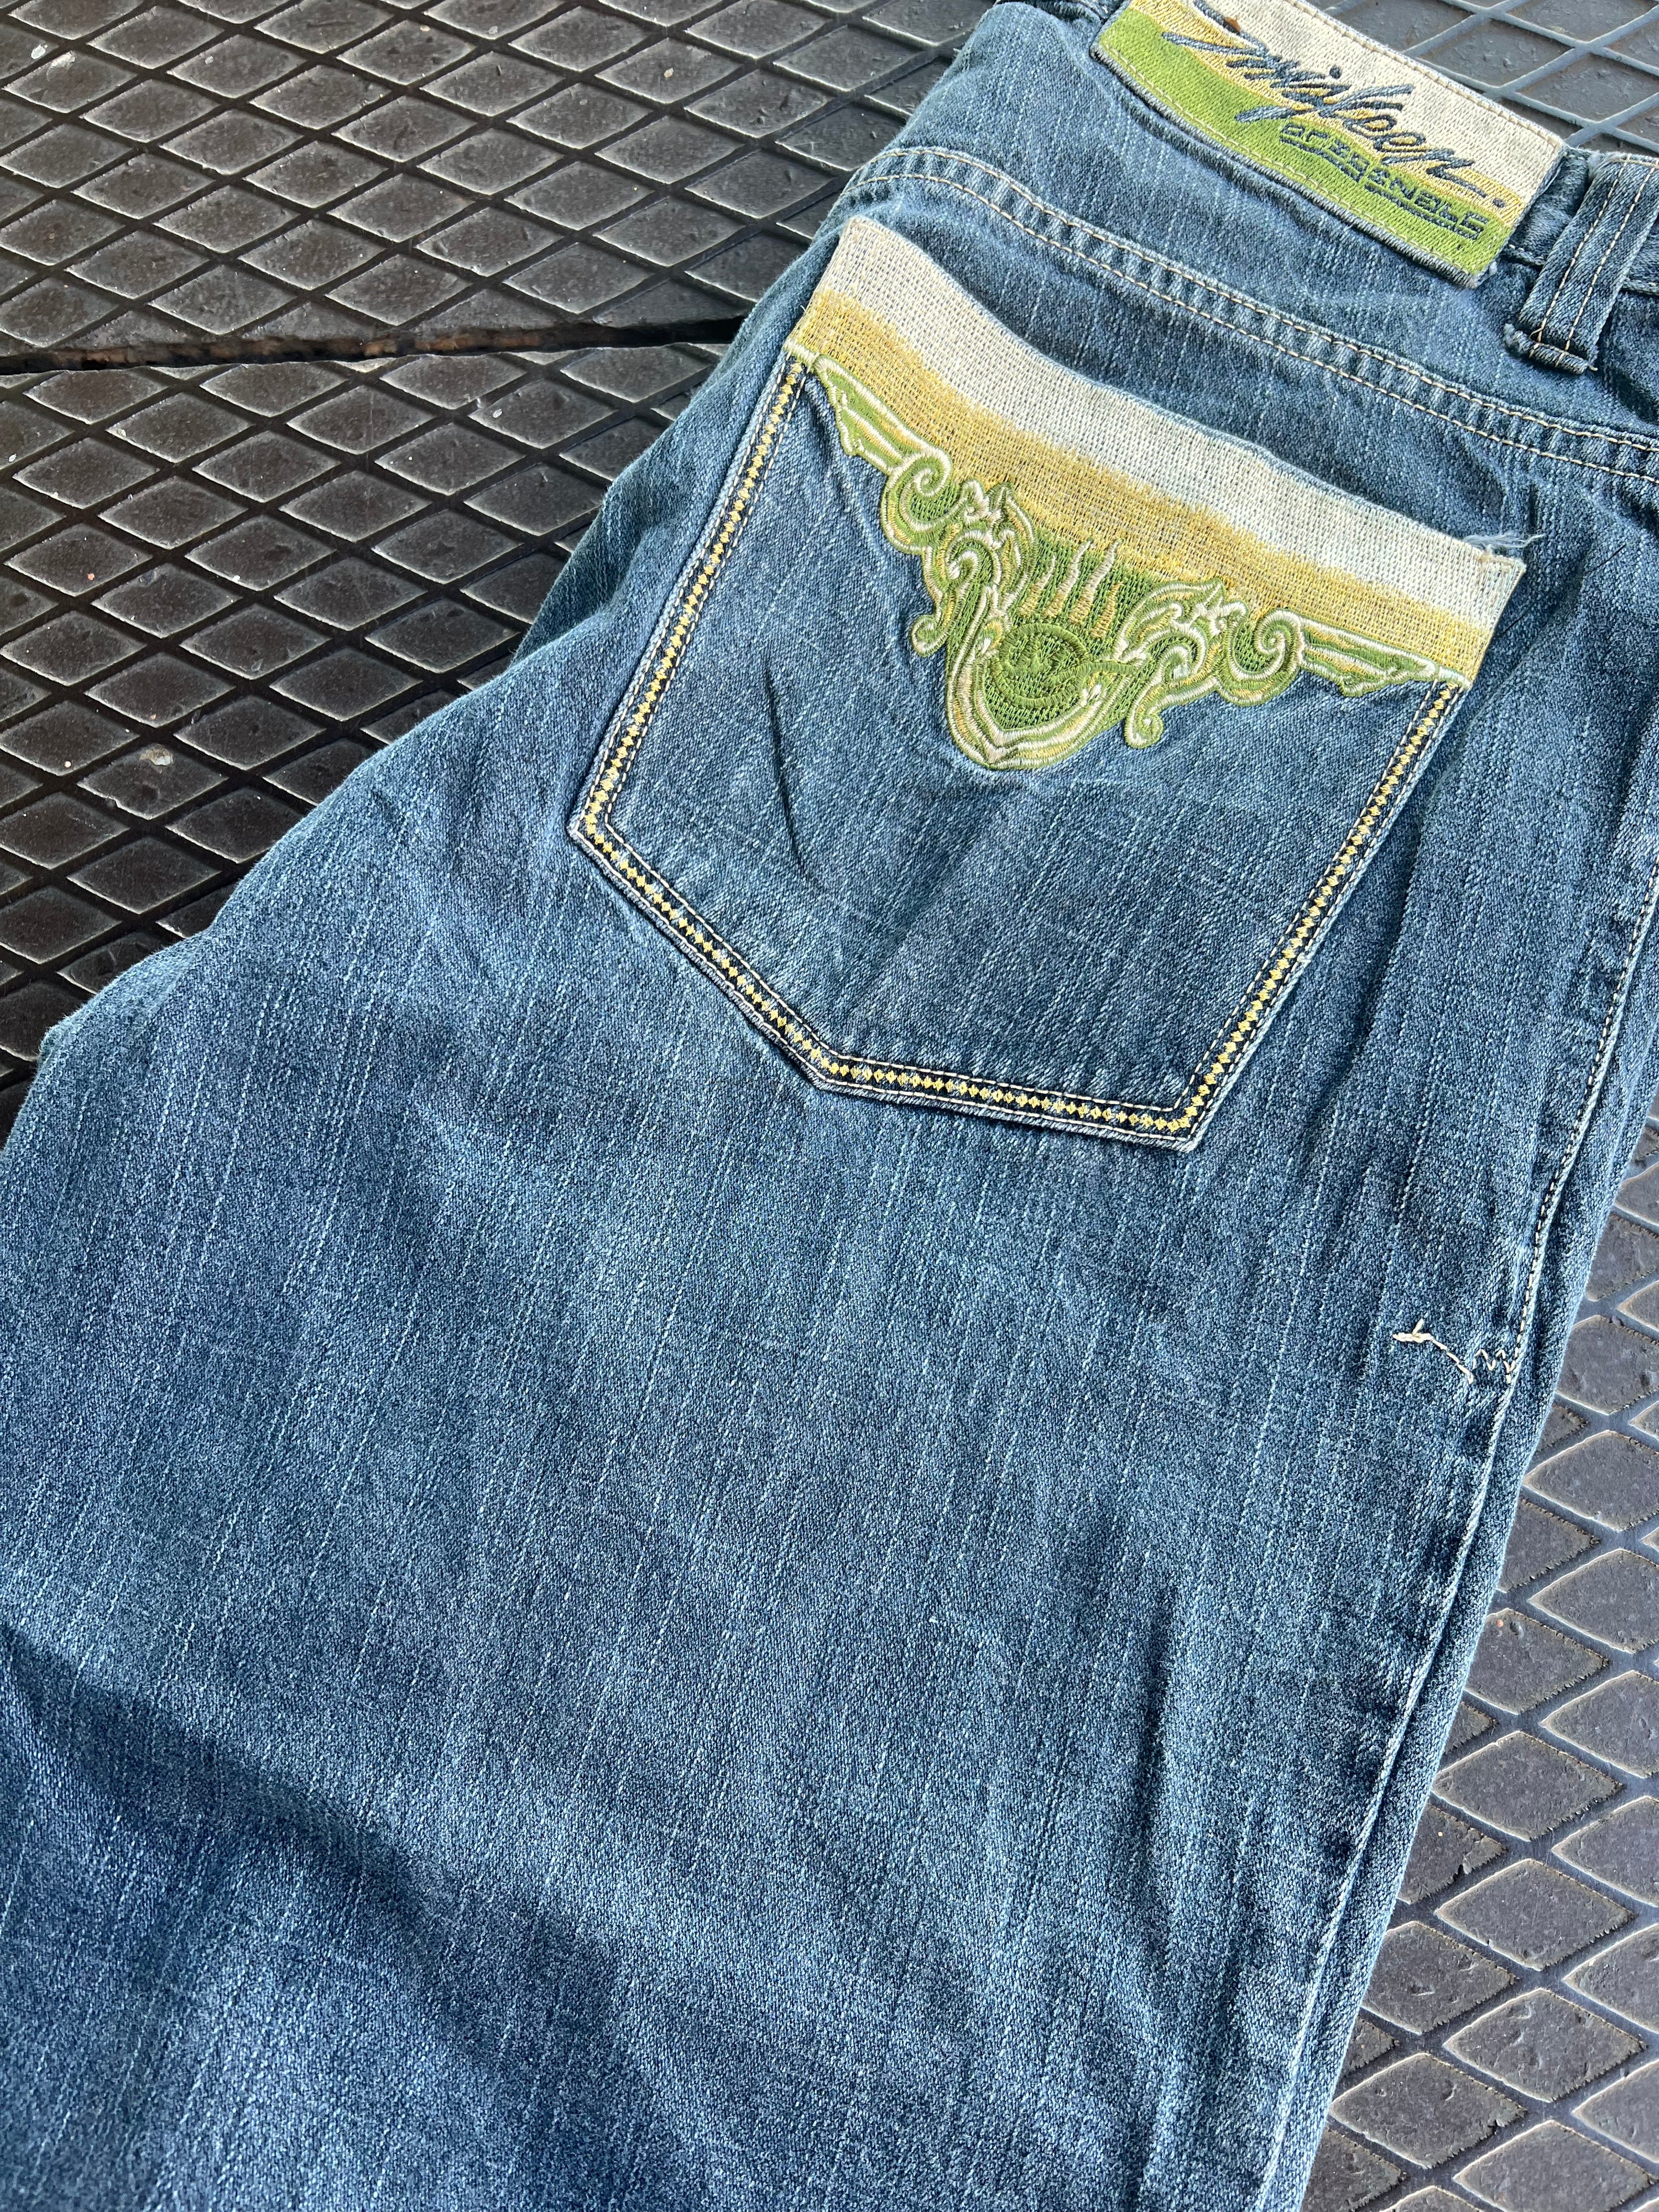 36 - Miskeen Green and Gold Embroidered Denim Shorts